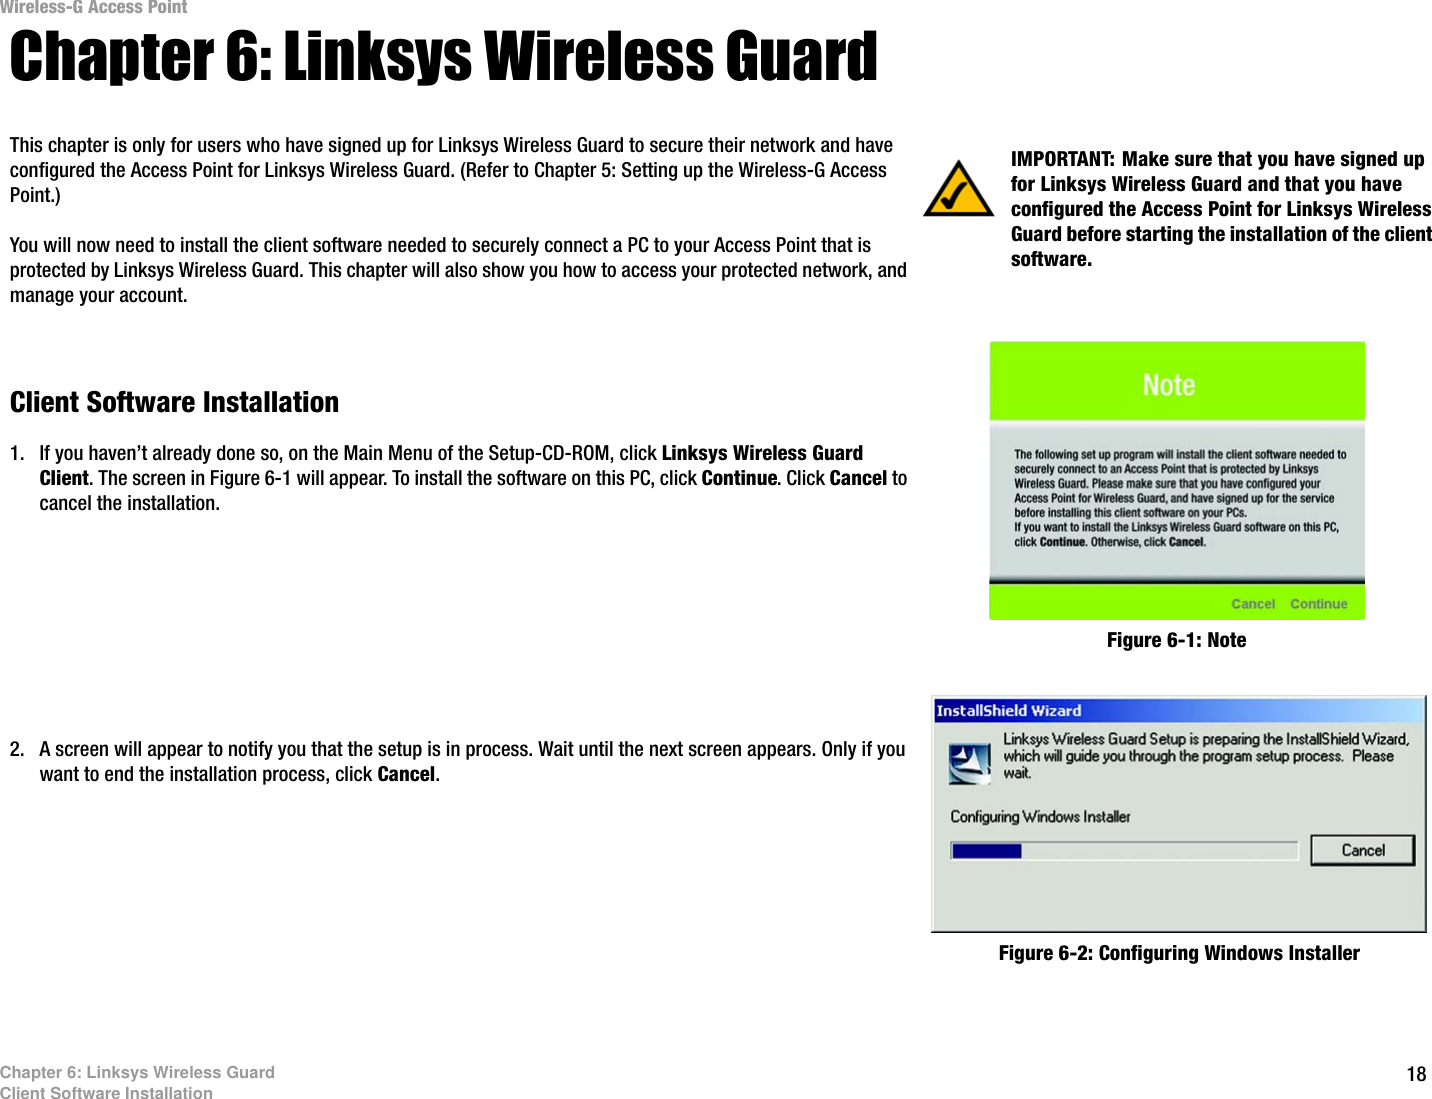 Wireless-G Access Point Chapter 6: Linksys Wireless Guard This chapter is only for users who have signed up for Linksys Wireless Guard to secure their network and have  IMPORTANT: Make sure that you have signed up configured the Access Point for Linksys Wireless Guard. (Refer to Chapter 5: Setting up the Wireless-G Access  for Linksys Wireless Guard and that you have Point.)  configured the Access Point for Linksys Wireless You will now need to install the client software needed to securely connect a PC to your Access Point that is protected by Linksys Wireless Guard. This chapter will also show you how to access your protected network, and manage your account. Client Software Installation 1.  If you haven’t already done so, on the Main Menu of the Setup-CD-ROM, click Linksys Wireless Guard Client. The screen in Figure 6-1 will appear. To install the software on this PC, click Continue. Click Cancel to cancel the installation. 2.  A screen will appear to notify you that the setup is in process. Wait until the next screen appears. Only if you want to end the installation process, click Cancel. Guard before starting the installation of the client software. Figure 6-1: Note Figure 6-2: Configuring Windows Installer Chapter 6: Linksys Wireless Guard Client Software Installation  18 